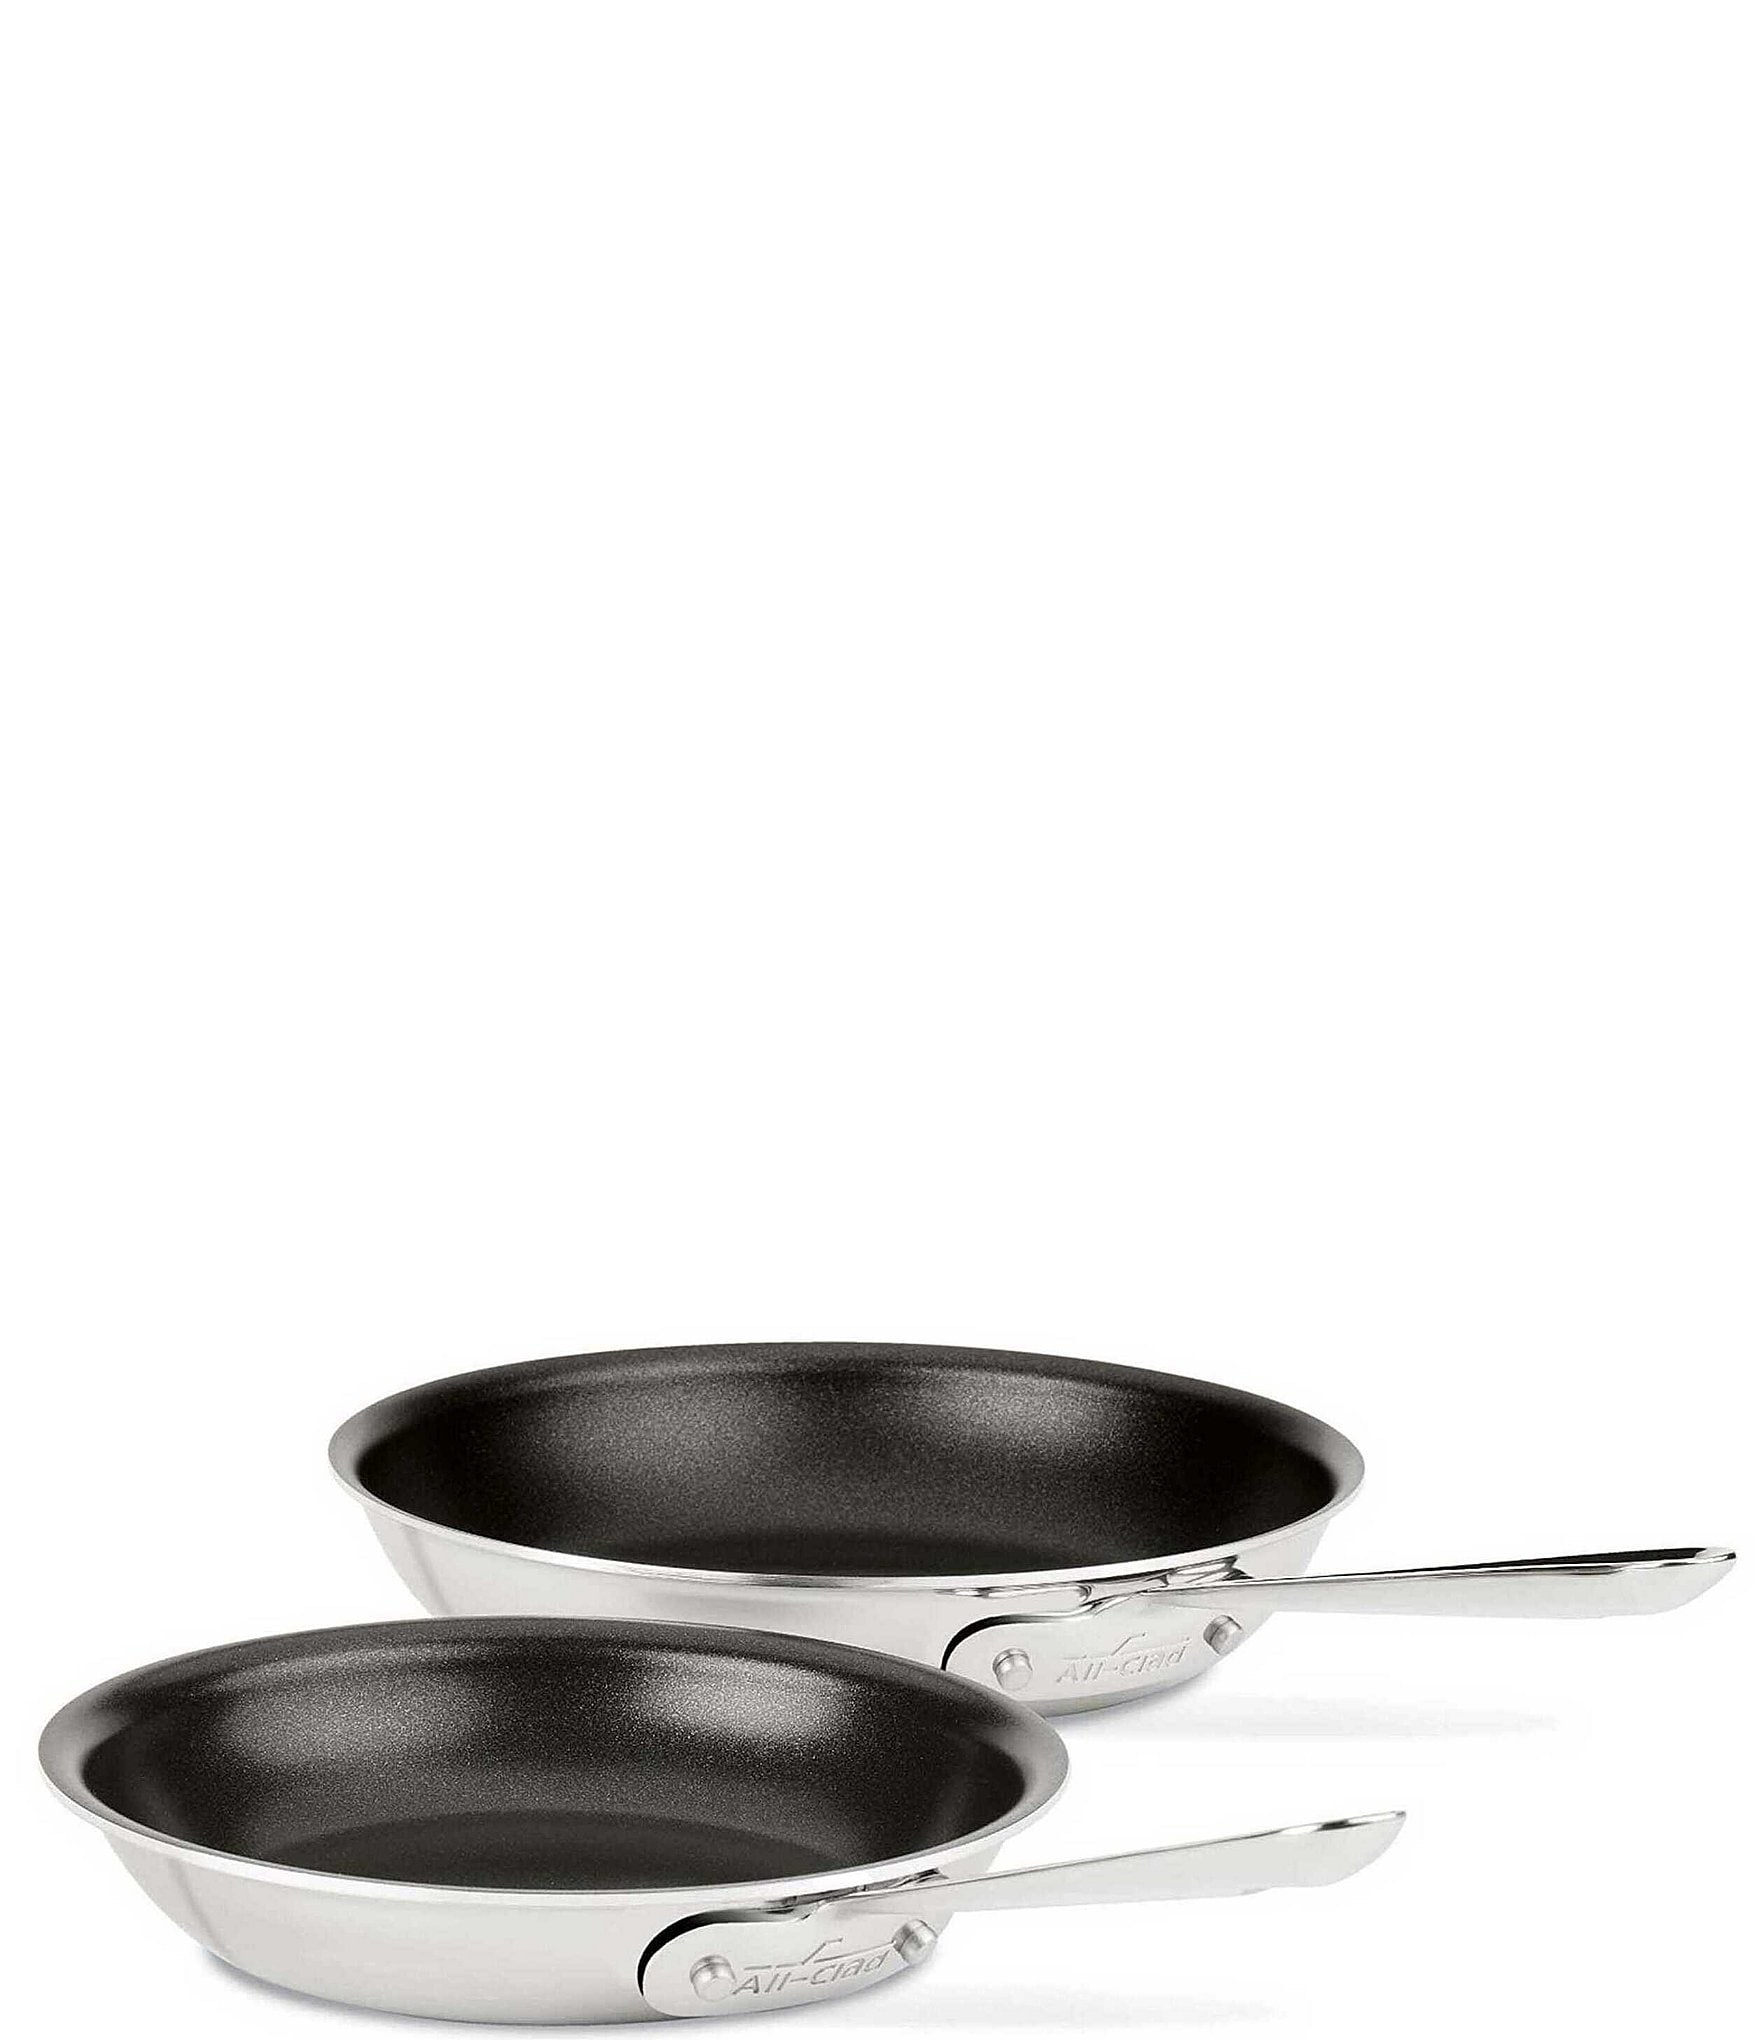 All-Clad D3 Stainless 3-Ply Bonded Cookware Set, Nonstick 2-Piece